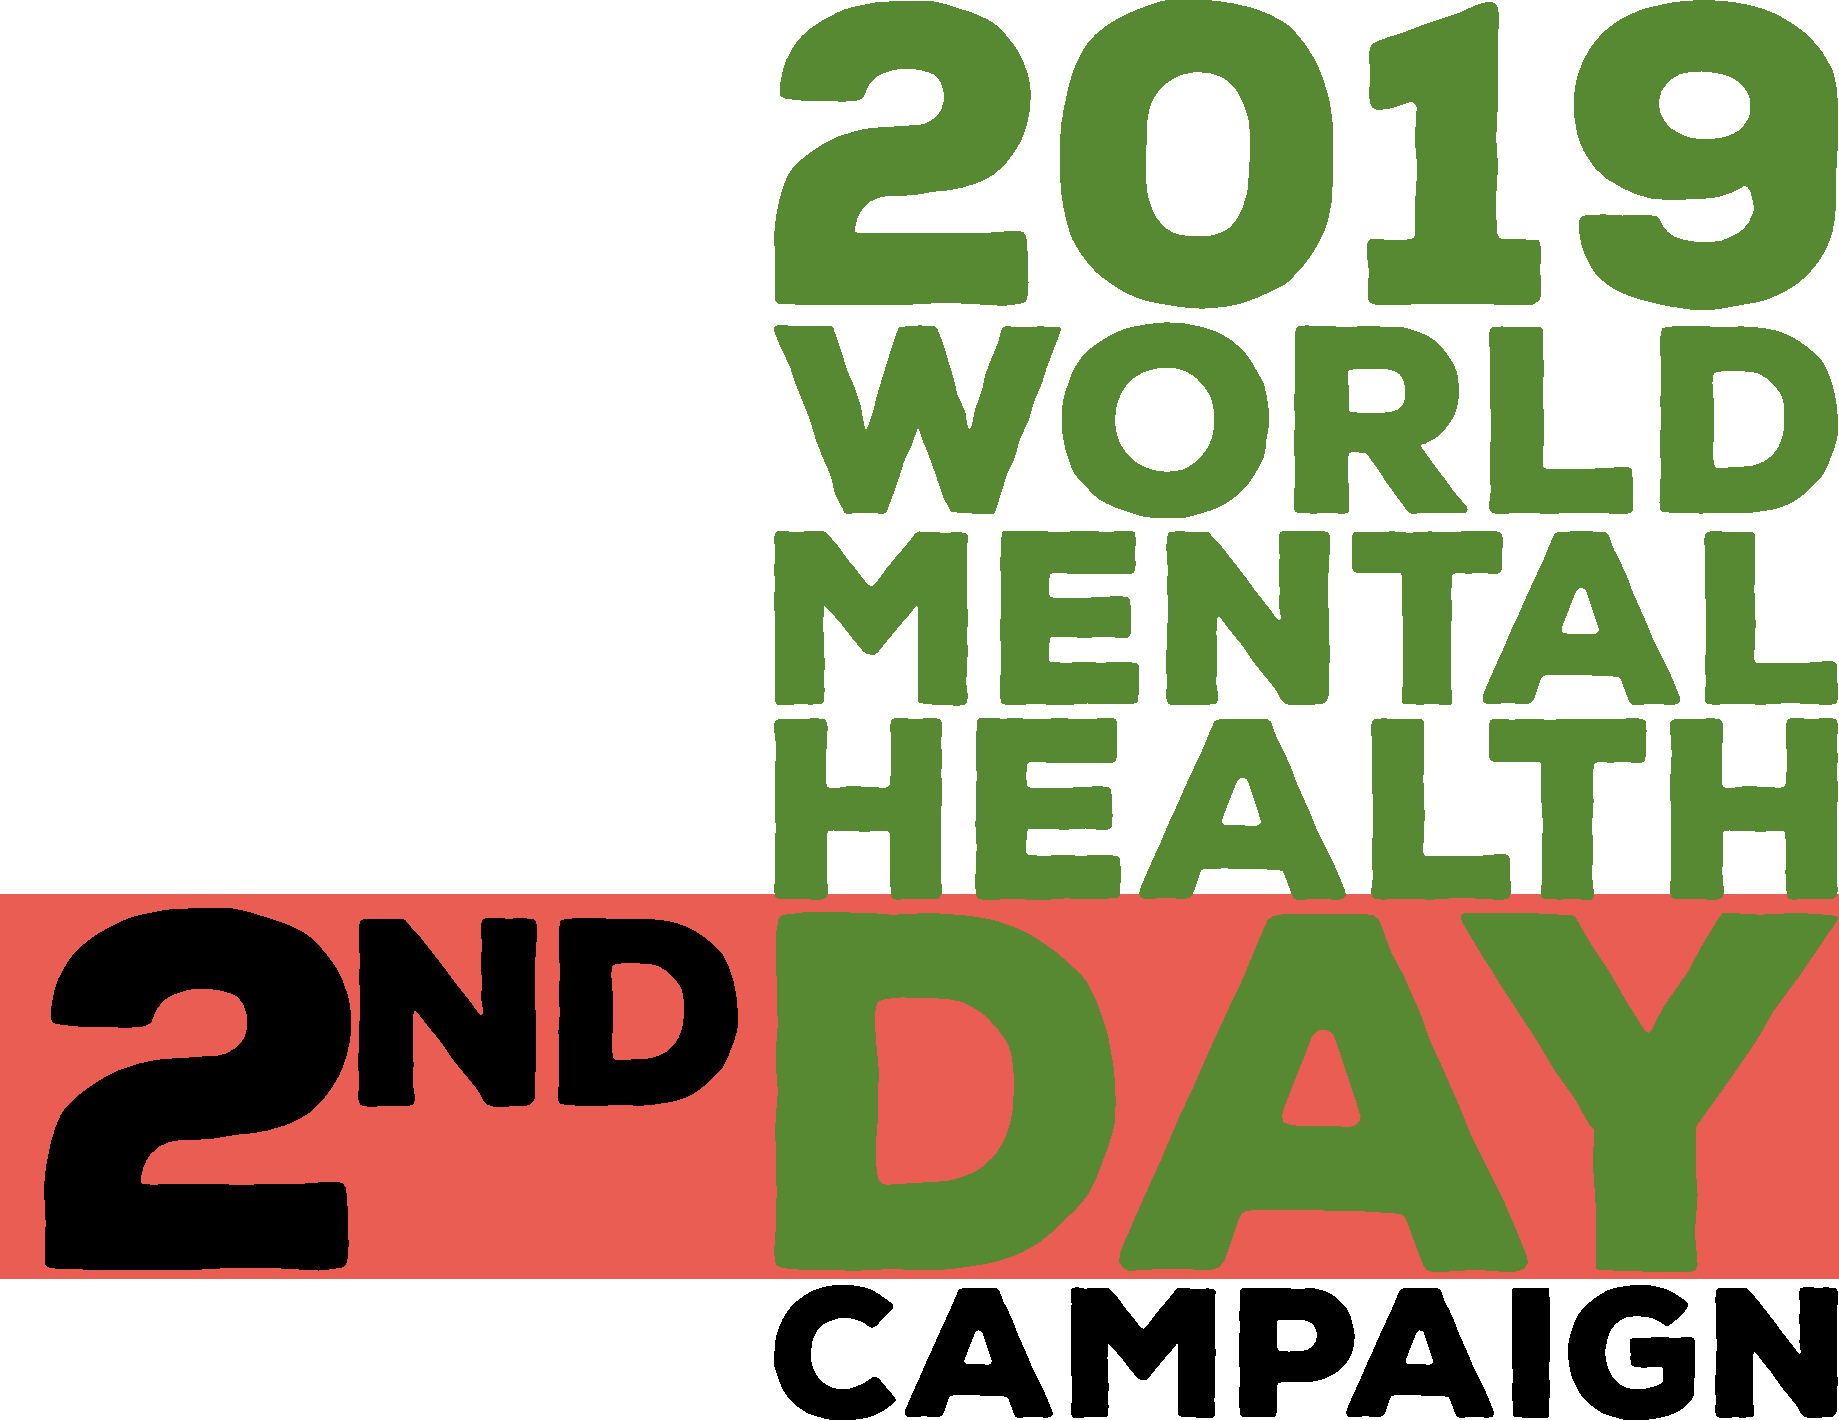 2019 world mental health day campaign logo 2nd day